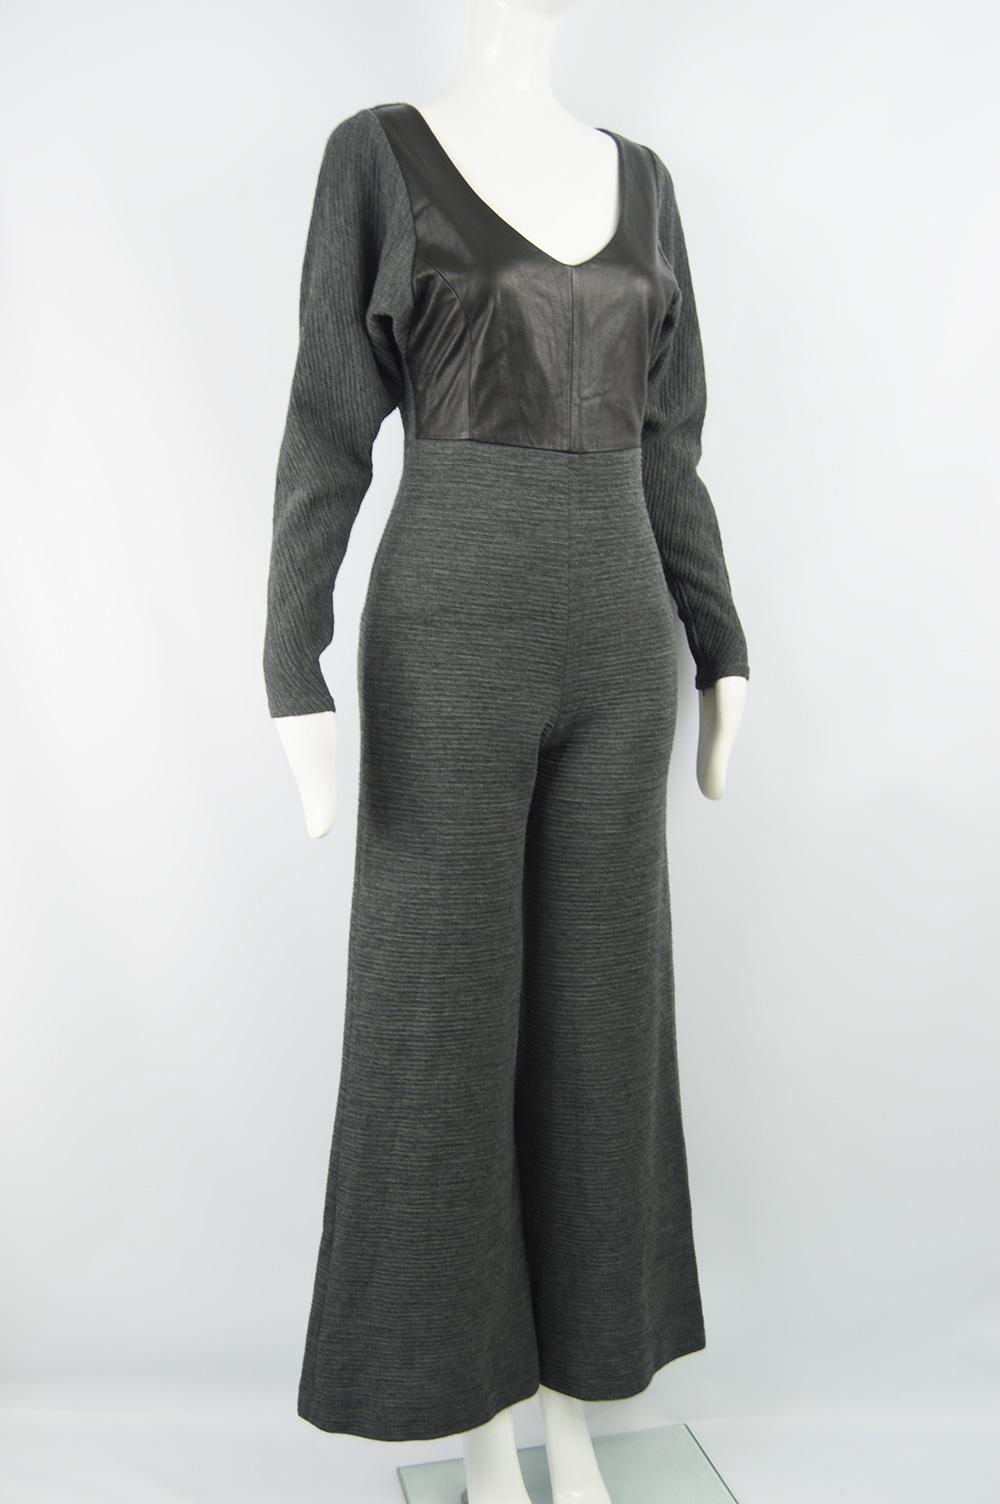 An incredible vintage Gianfranco Ferre wide leg jumpsuit from the 90s. Made in Italy, from a grey wool ribbed knit with a black leather panel at the front, long sleeves, a deep neckline and palazzo legs. 

Size: Marked vintage IT 42 but fits more